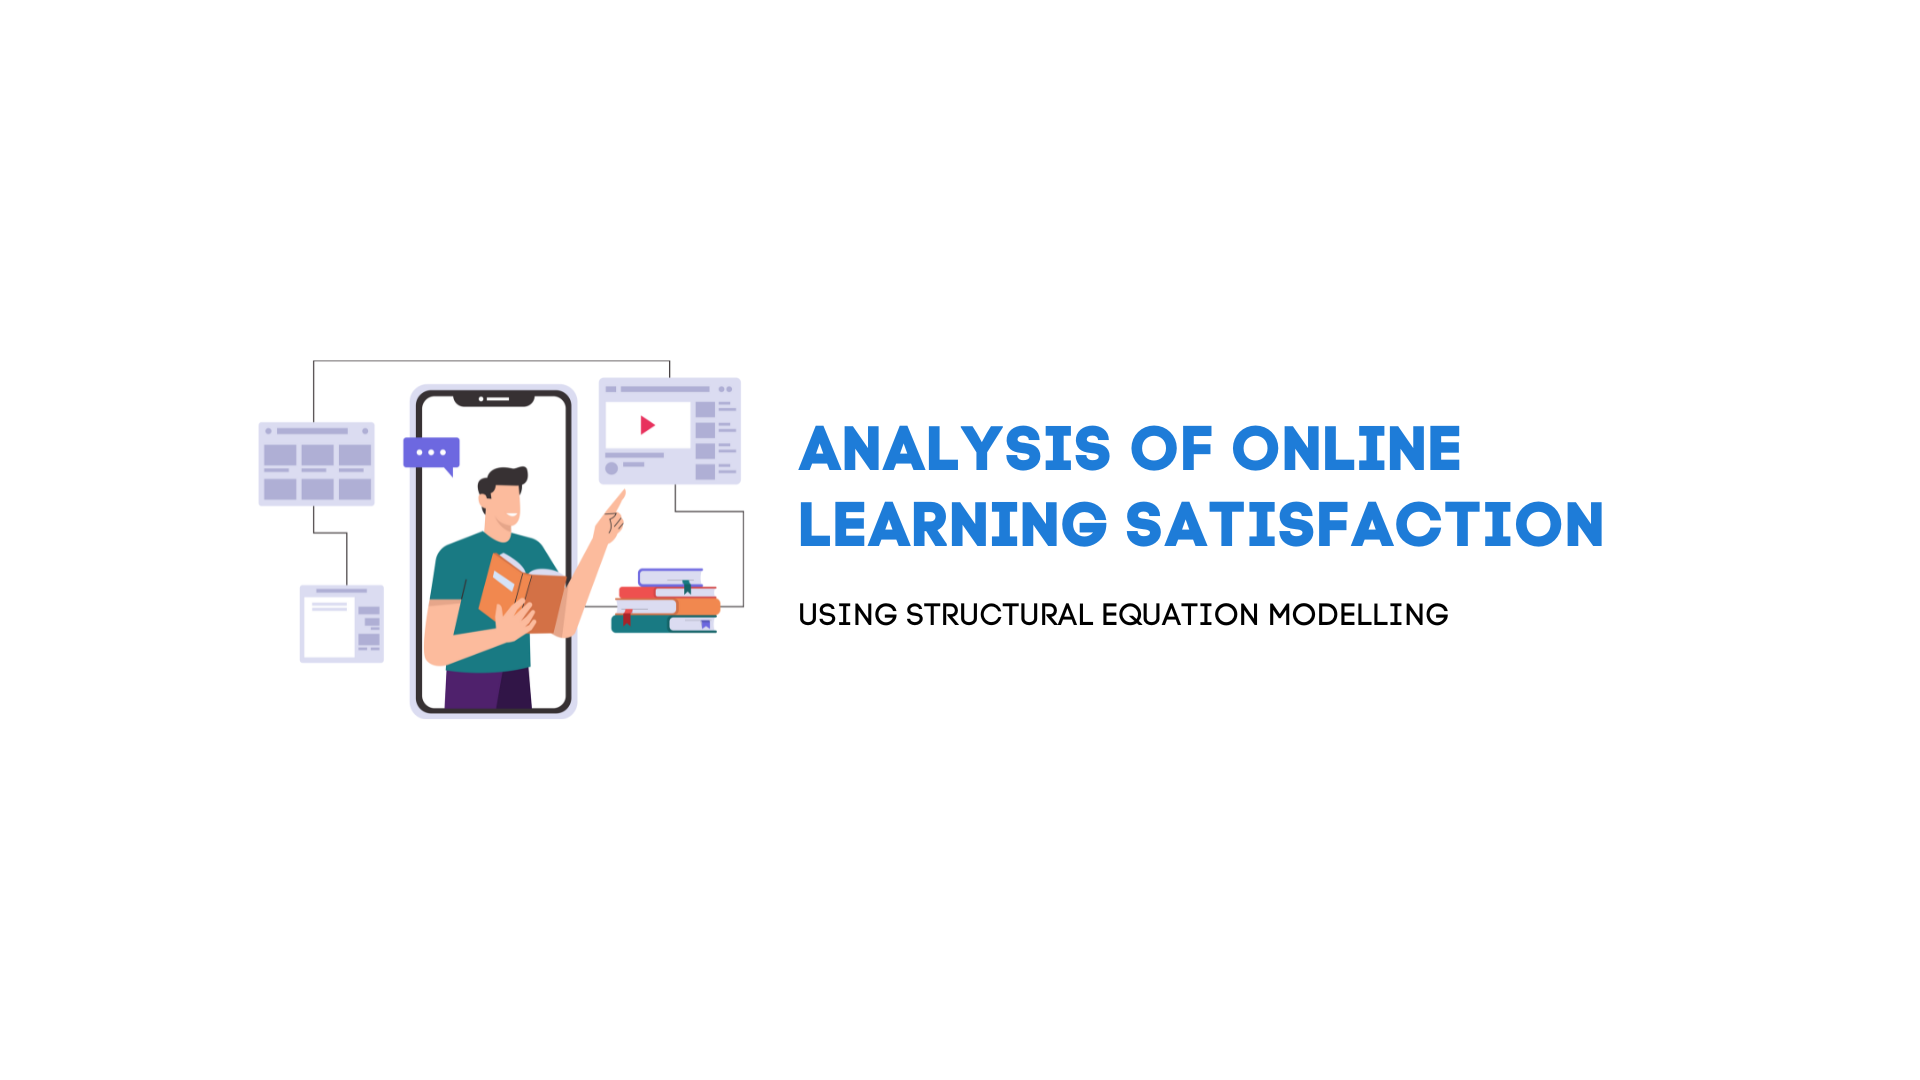 Analysis of online learning satisfaction using structural equation modelling